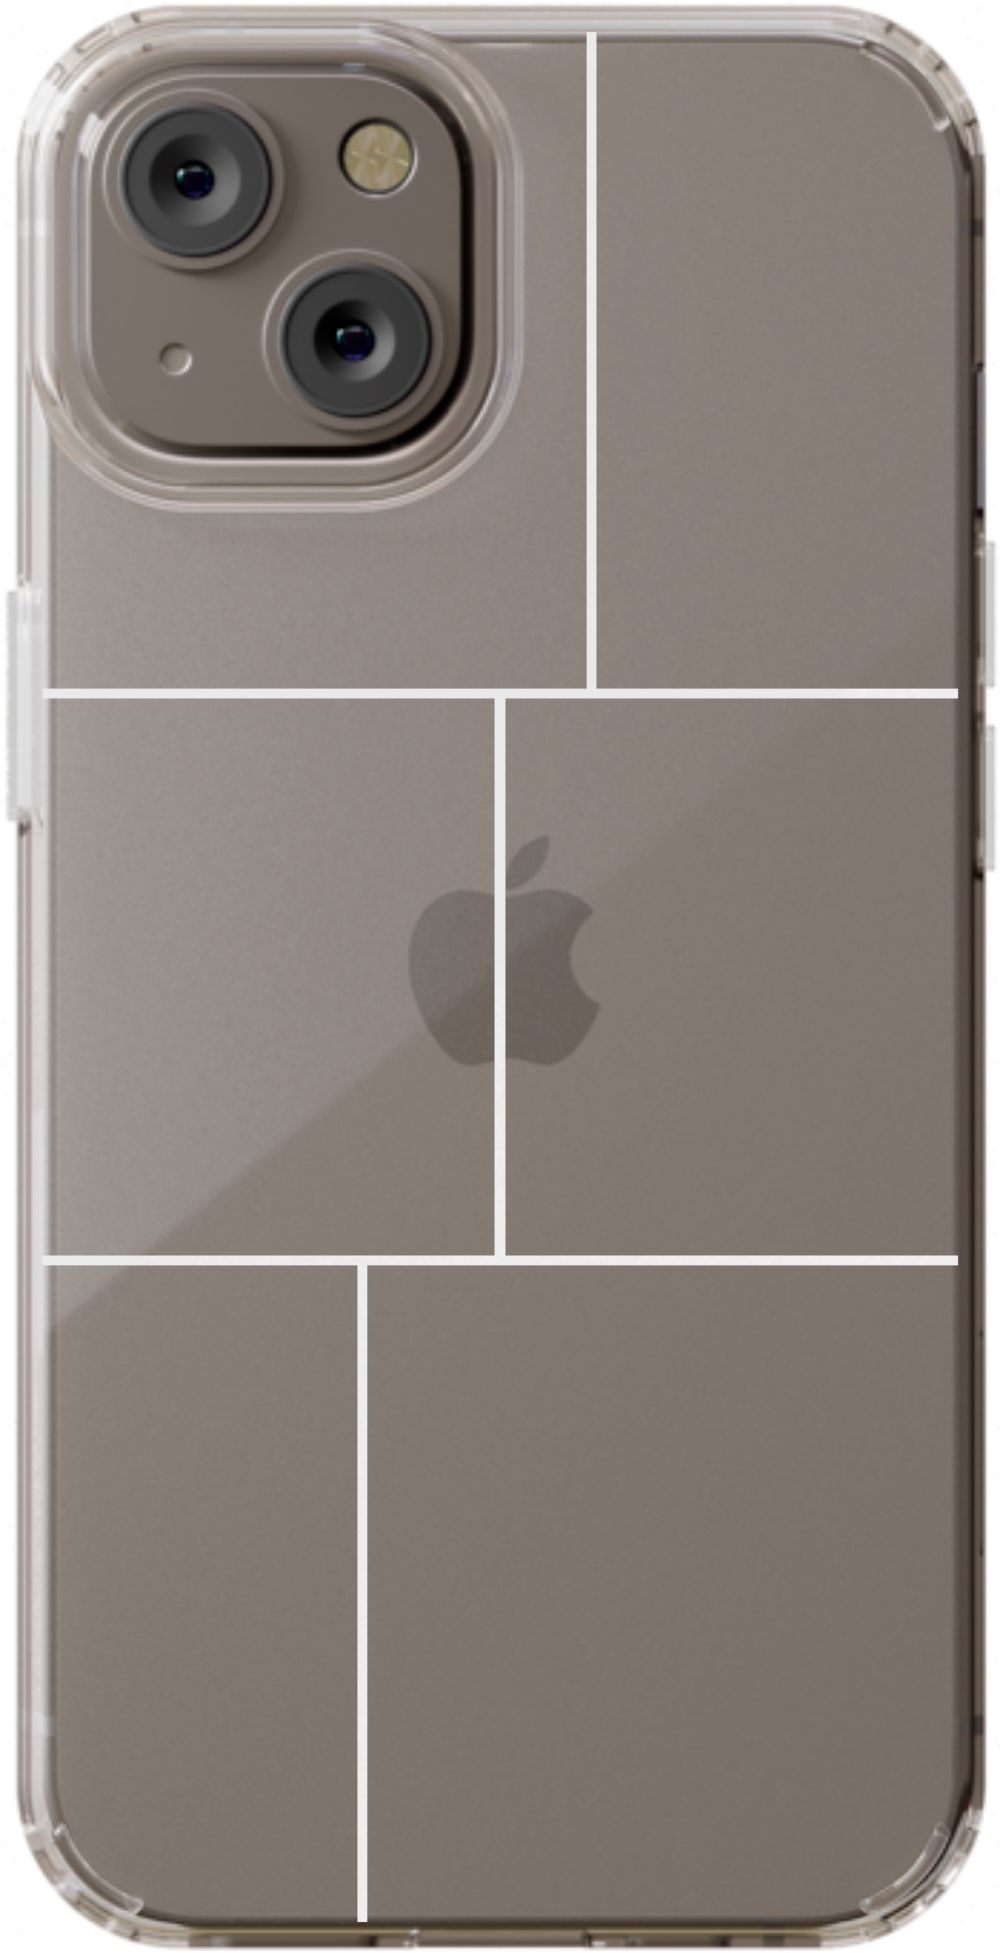 Photo Collage iPhone Case - Scatter Collage - daziecases